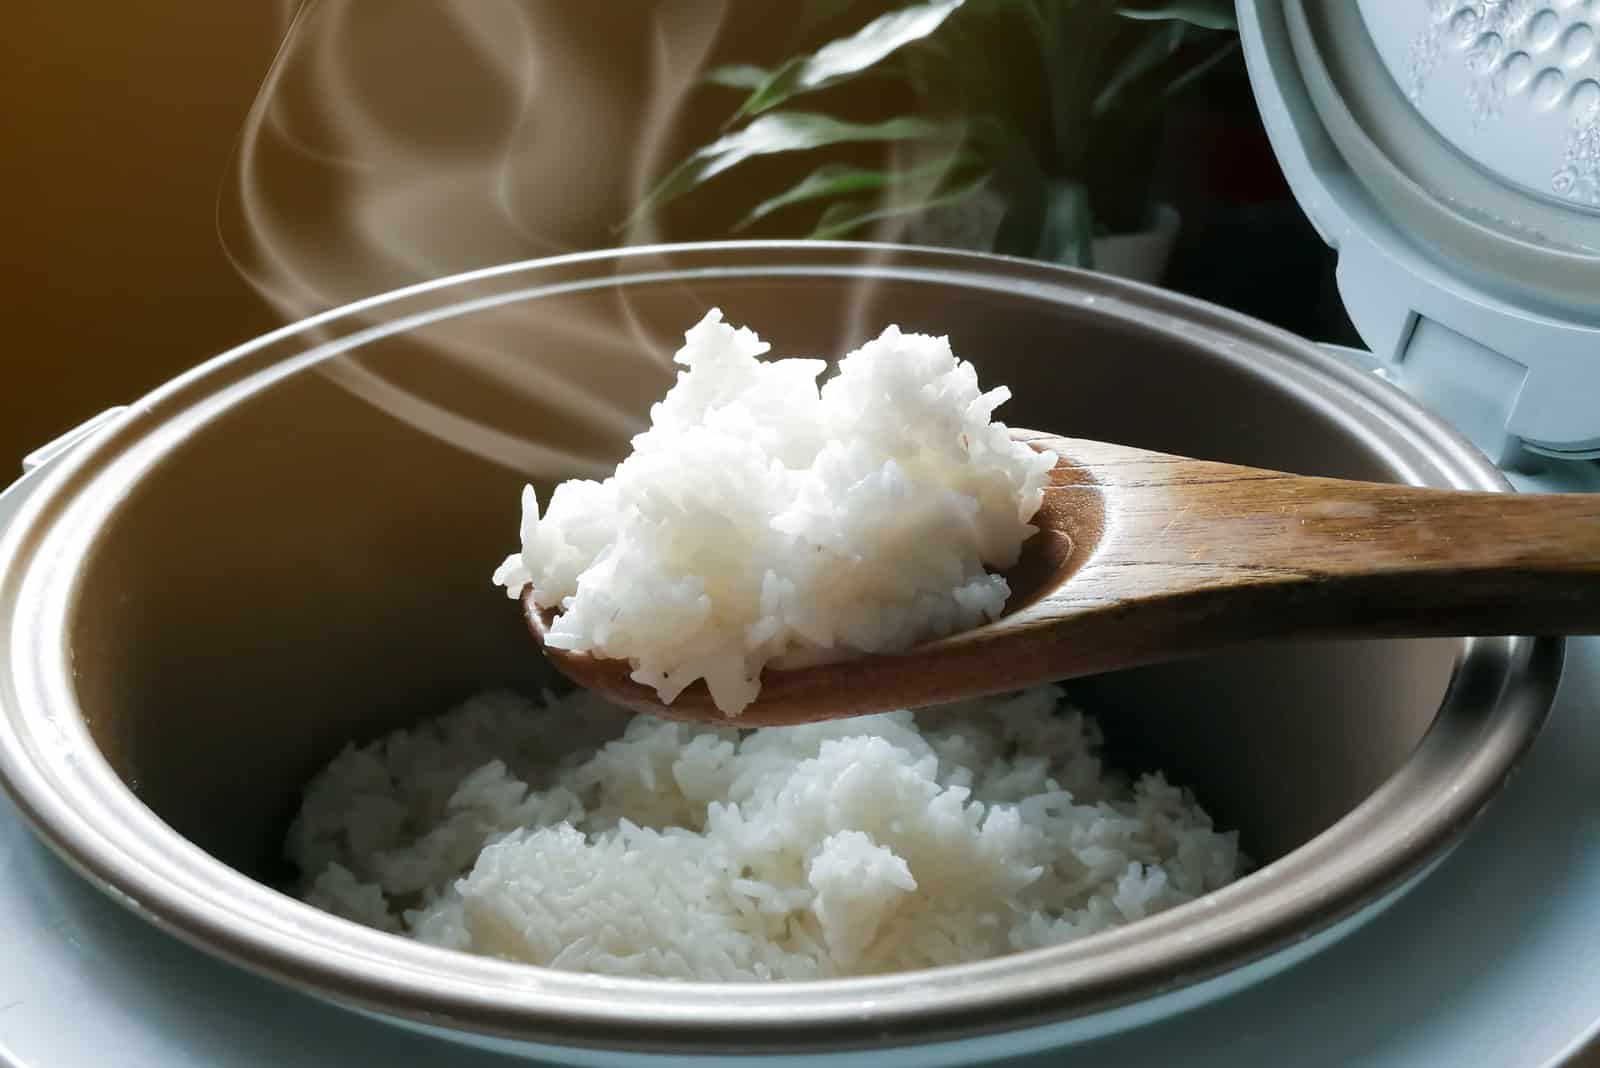 Jasmine rice cooking in electric rice cooker with steam